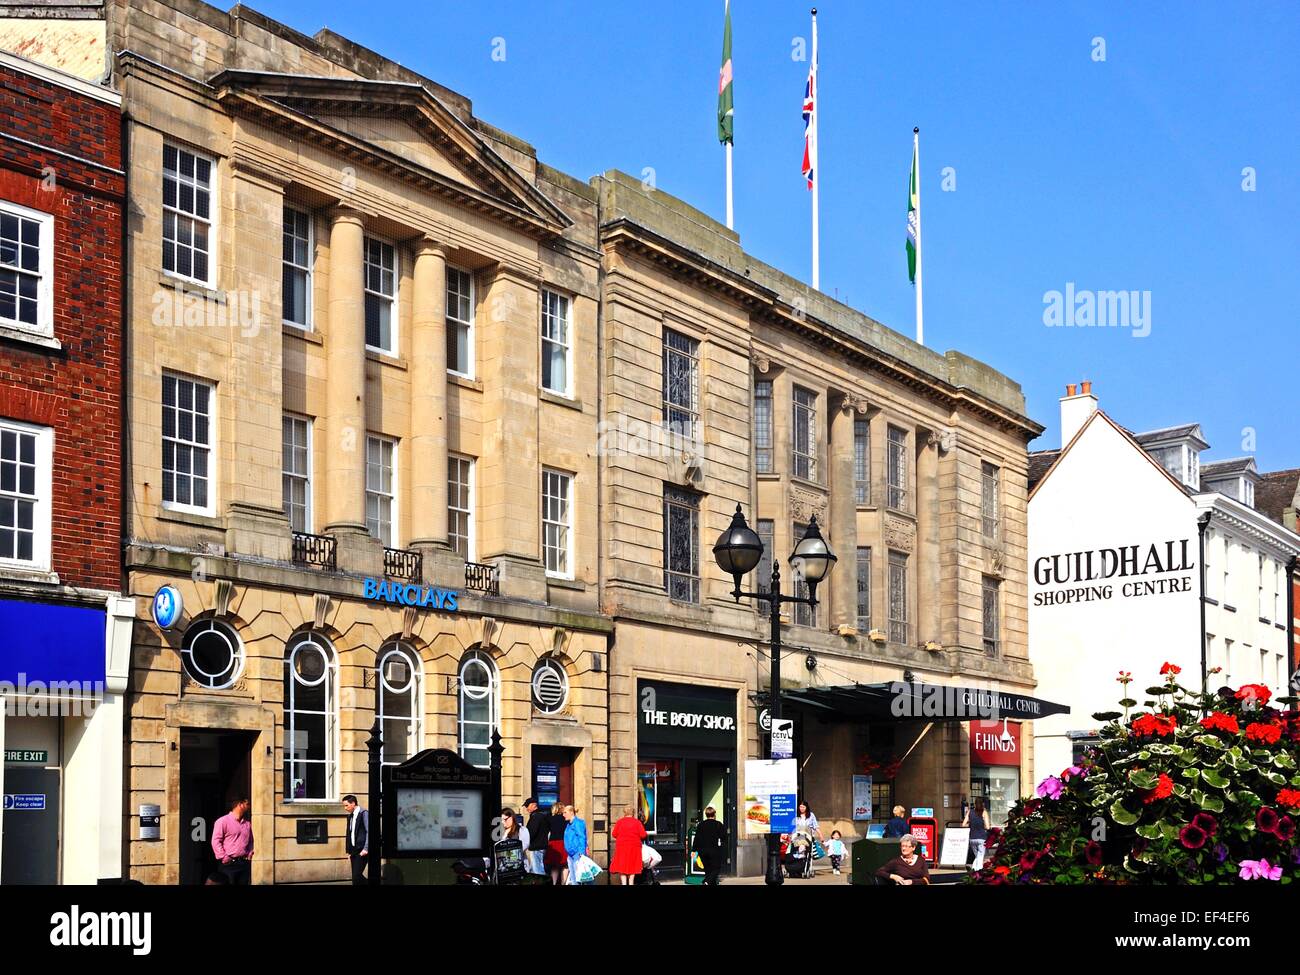 Barclays Bank and shops in Market Square, Stafford, Staffordshire, England, UK, Western Europe. Stock Photo